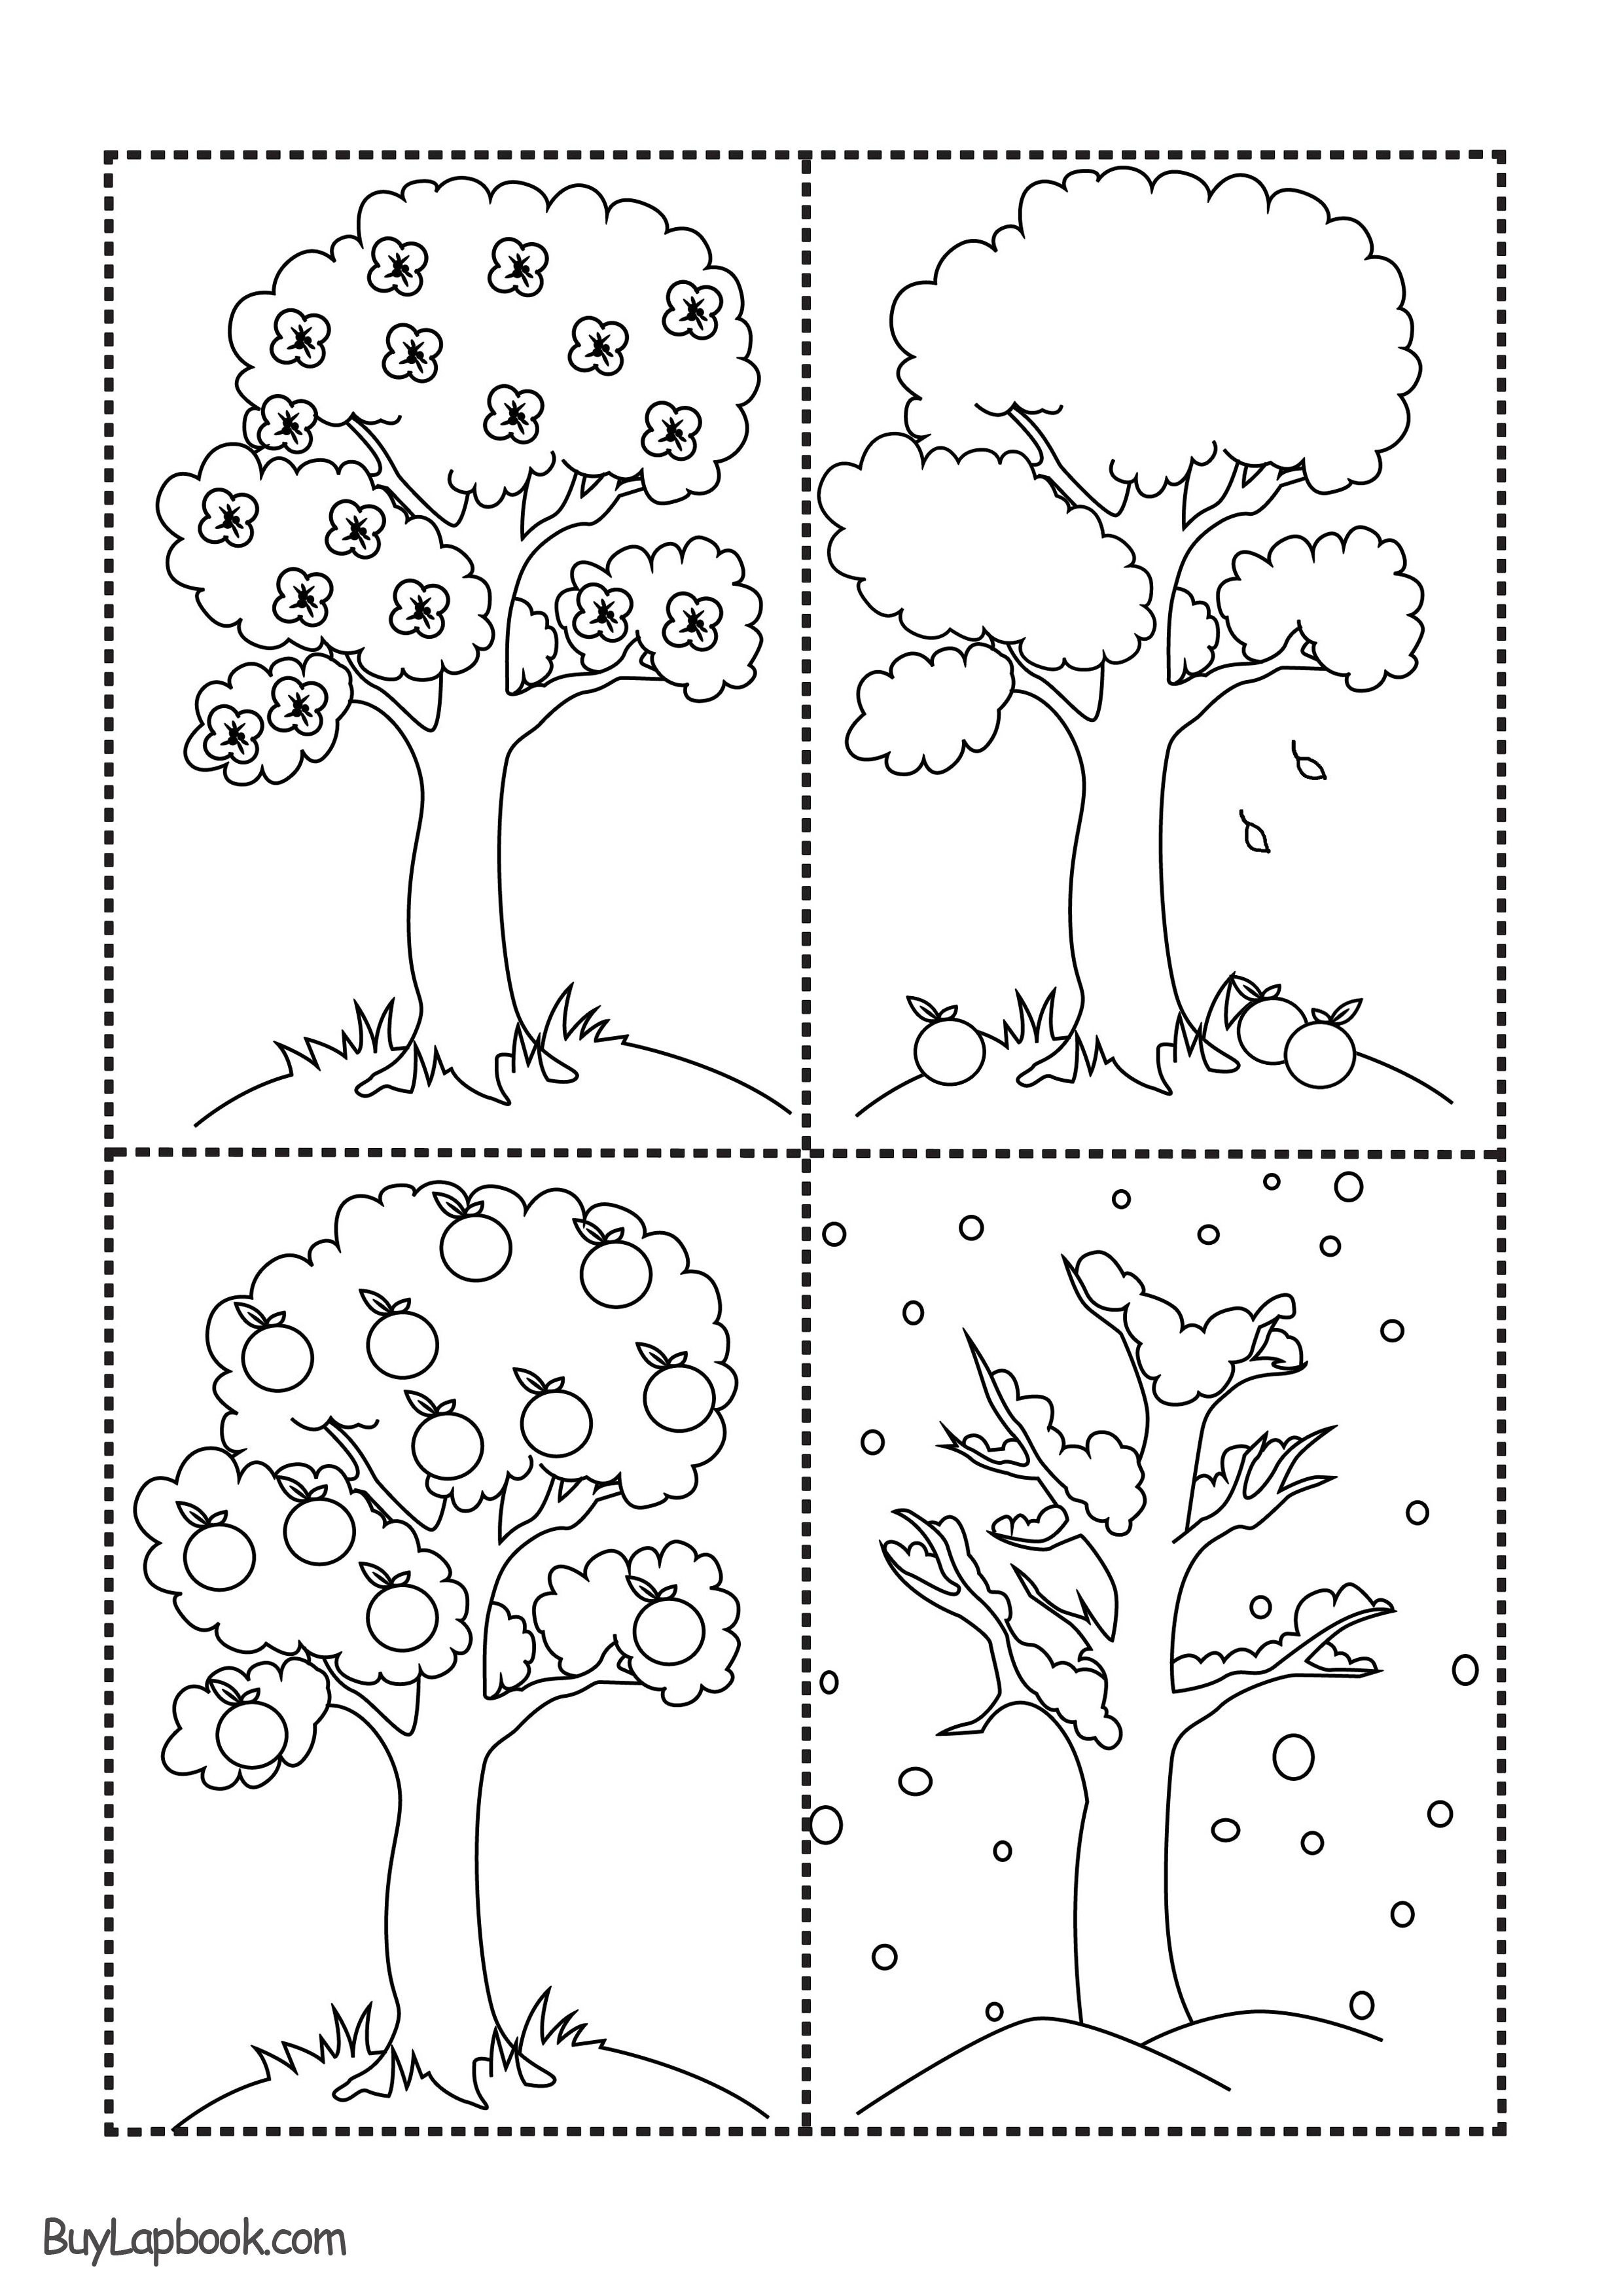 The Four Seasons of the Apple Tree Printables – BuyLapbook